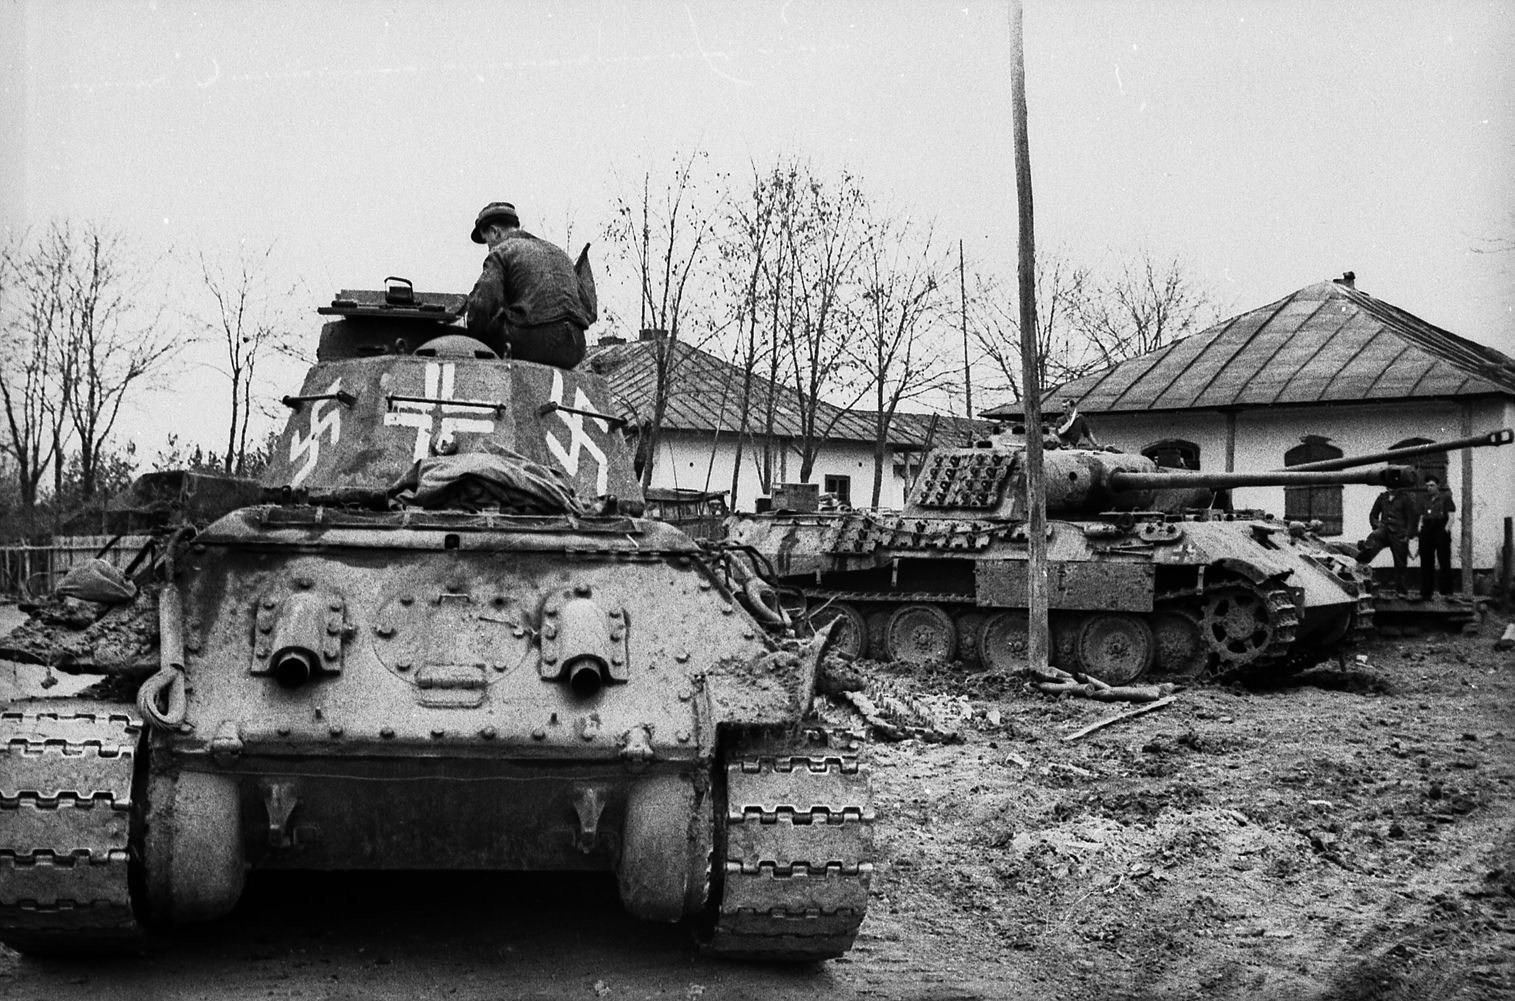 Photographed somewhere in the Ukraine, a captured Soviet T-34 medium tank has been pressed into service with the German Army and painted with swastikas and a white cross for recognition purposes. 